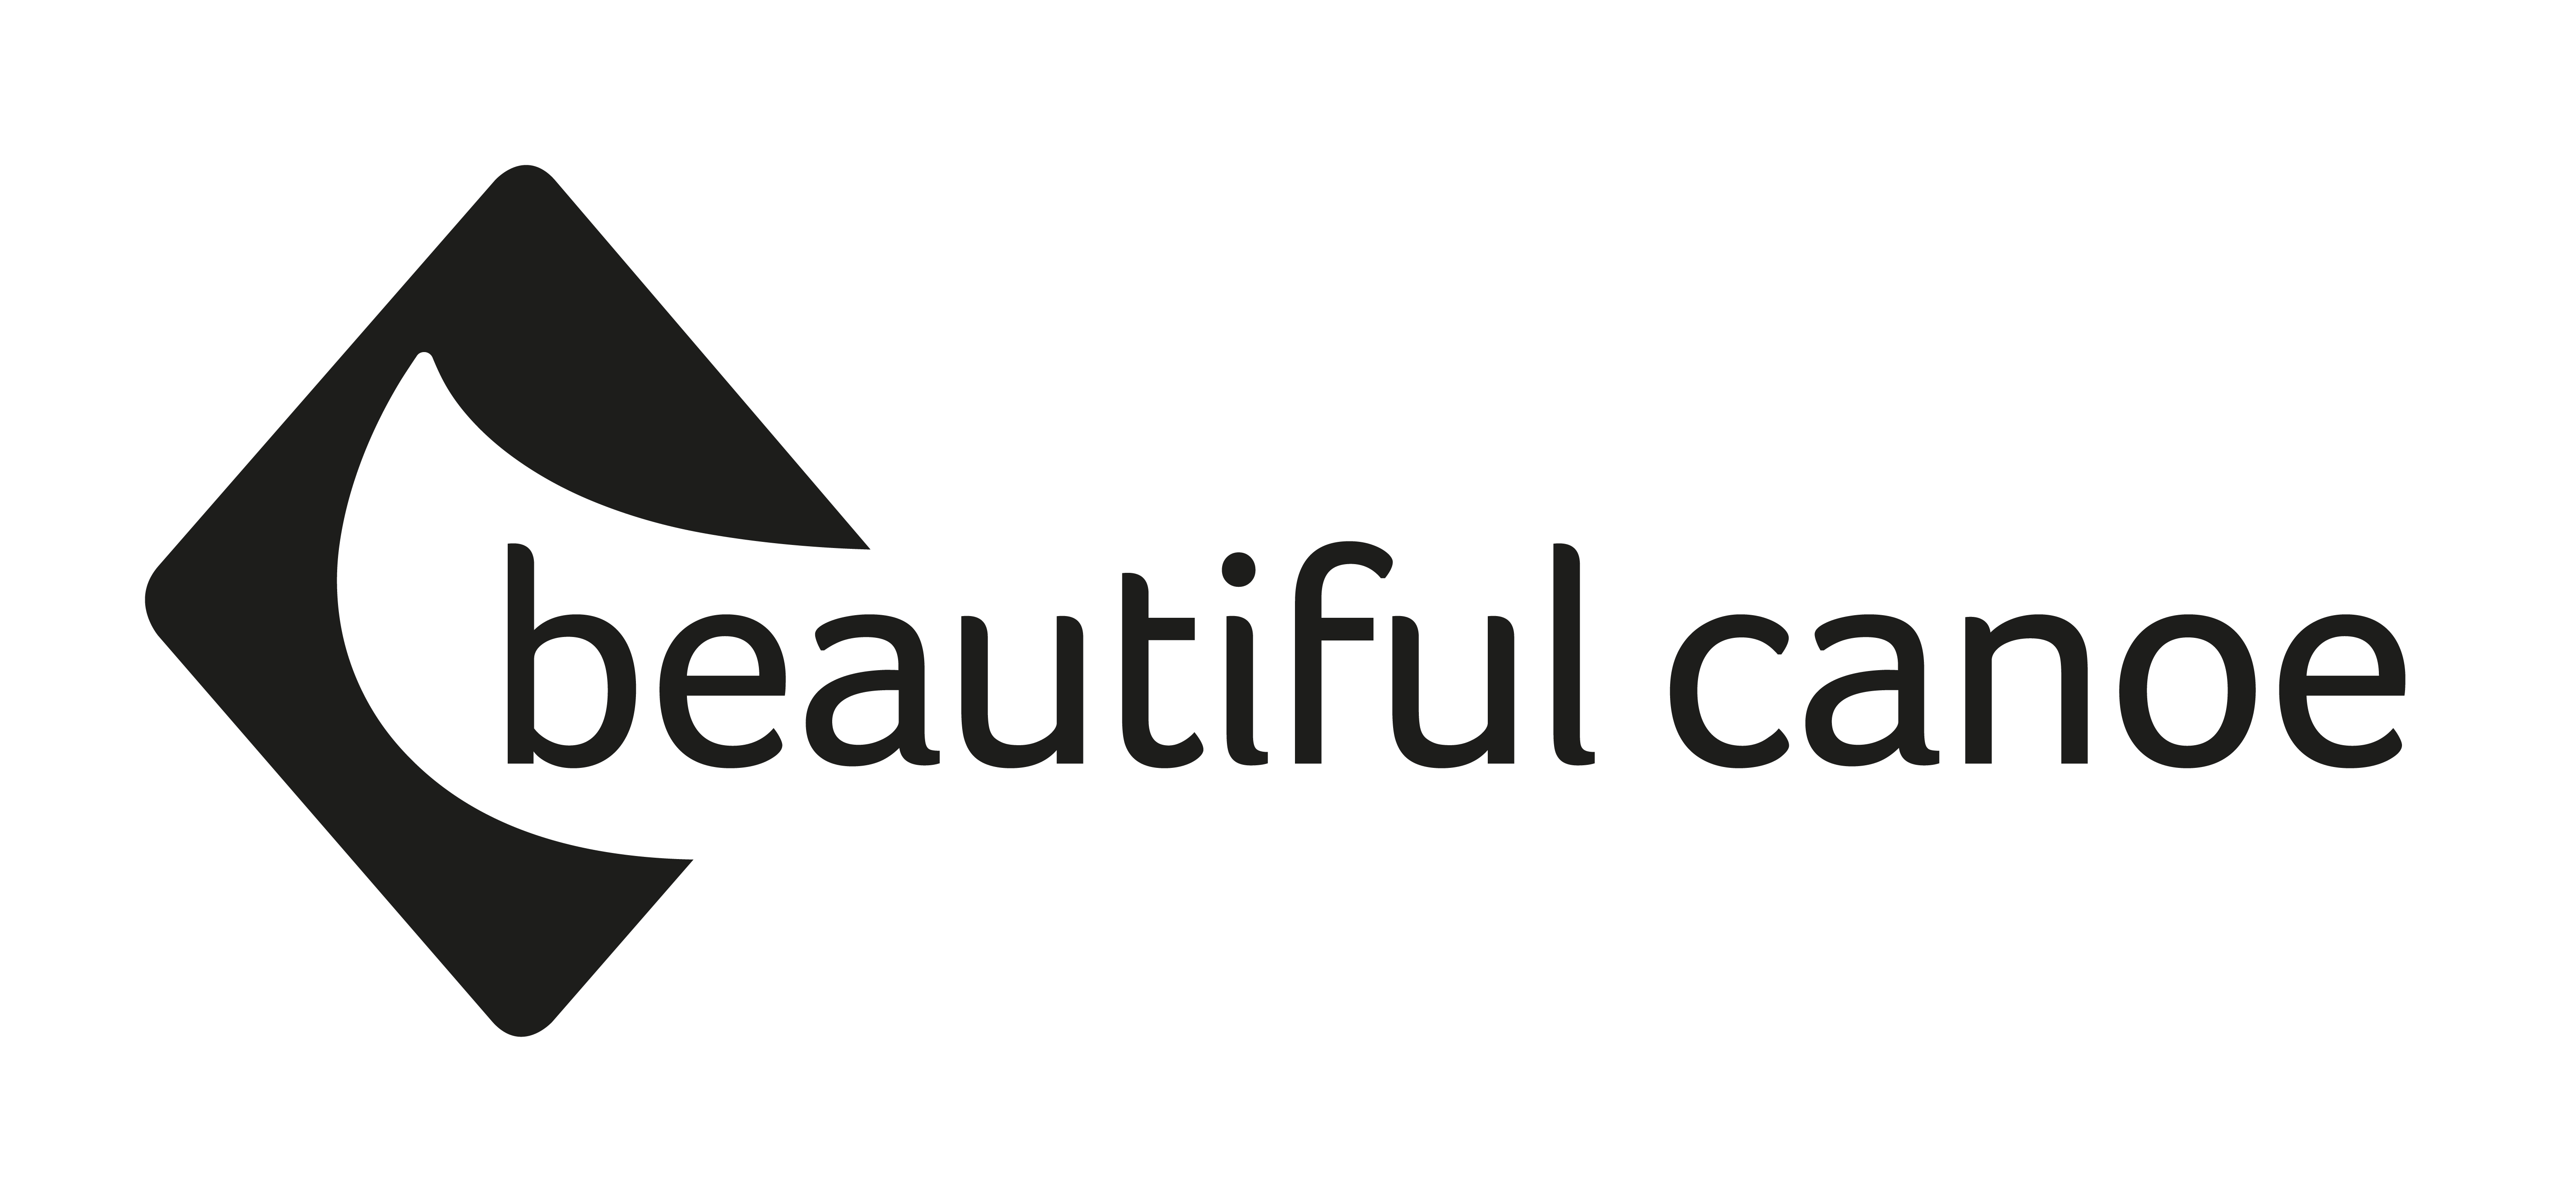 Beautiful Canoe logo in black with transparent background